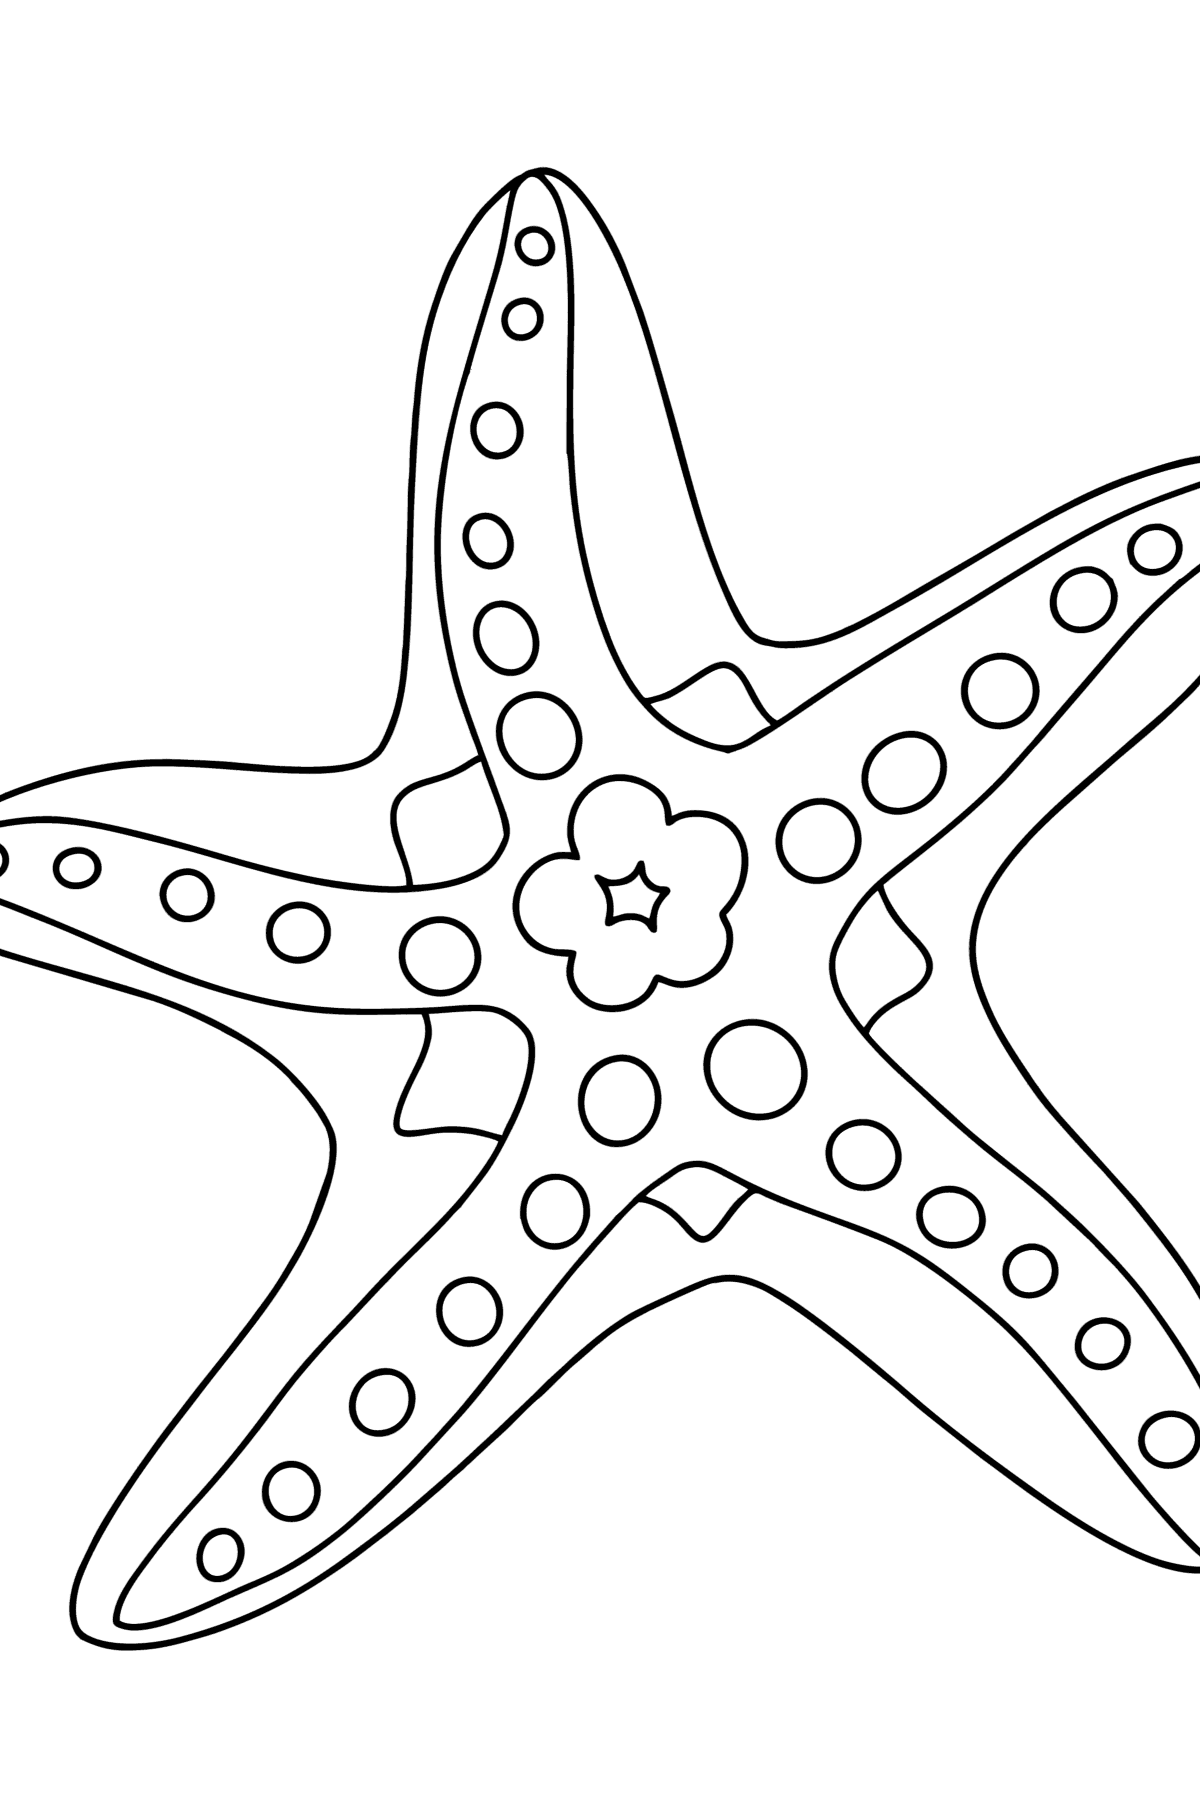 Starfish coloring page - Coloring Pages for Kids